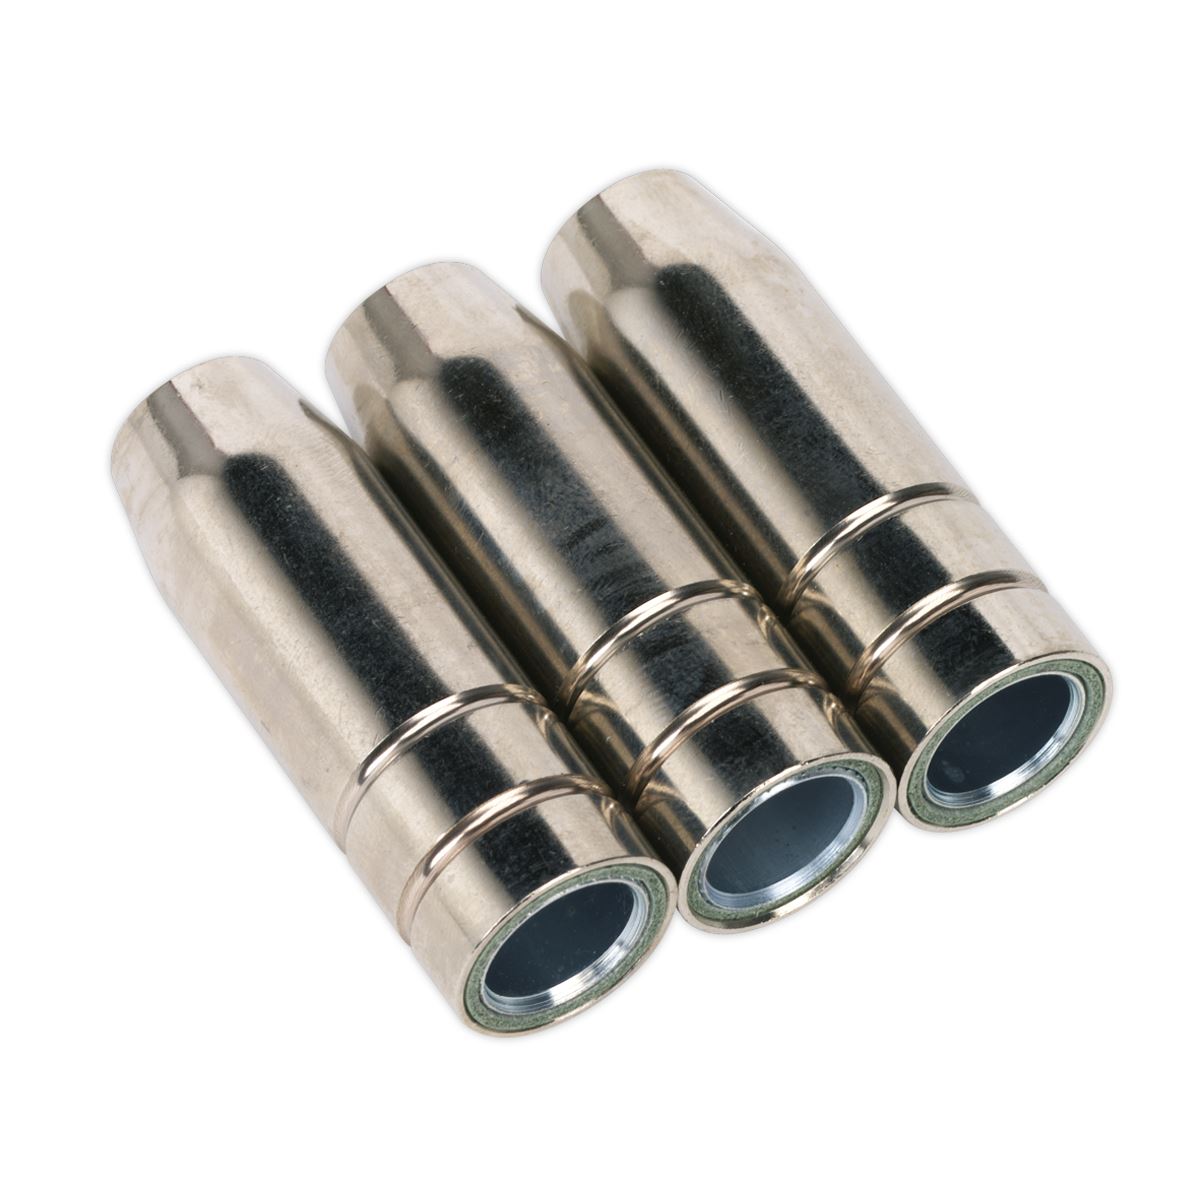 Sealey Conical Nozzle MB15 Pack of 3